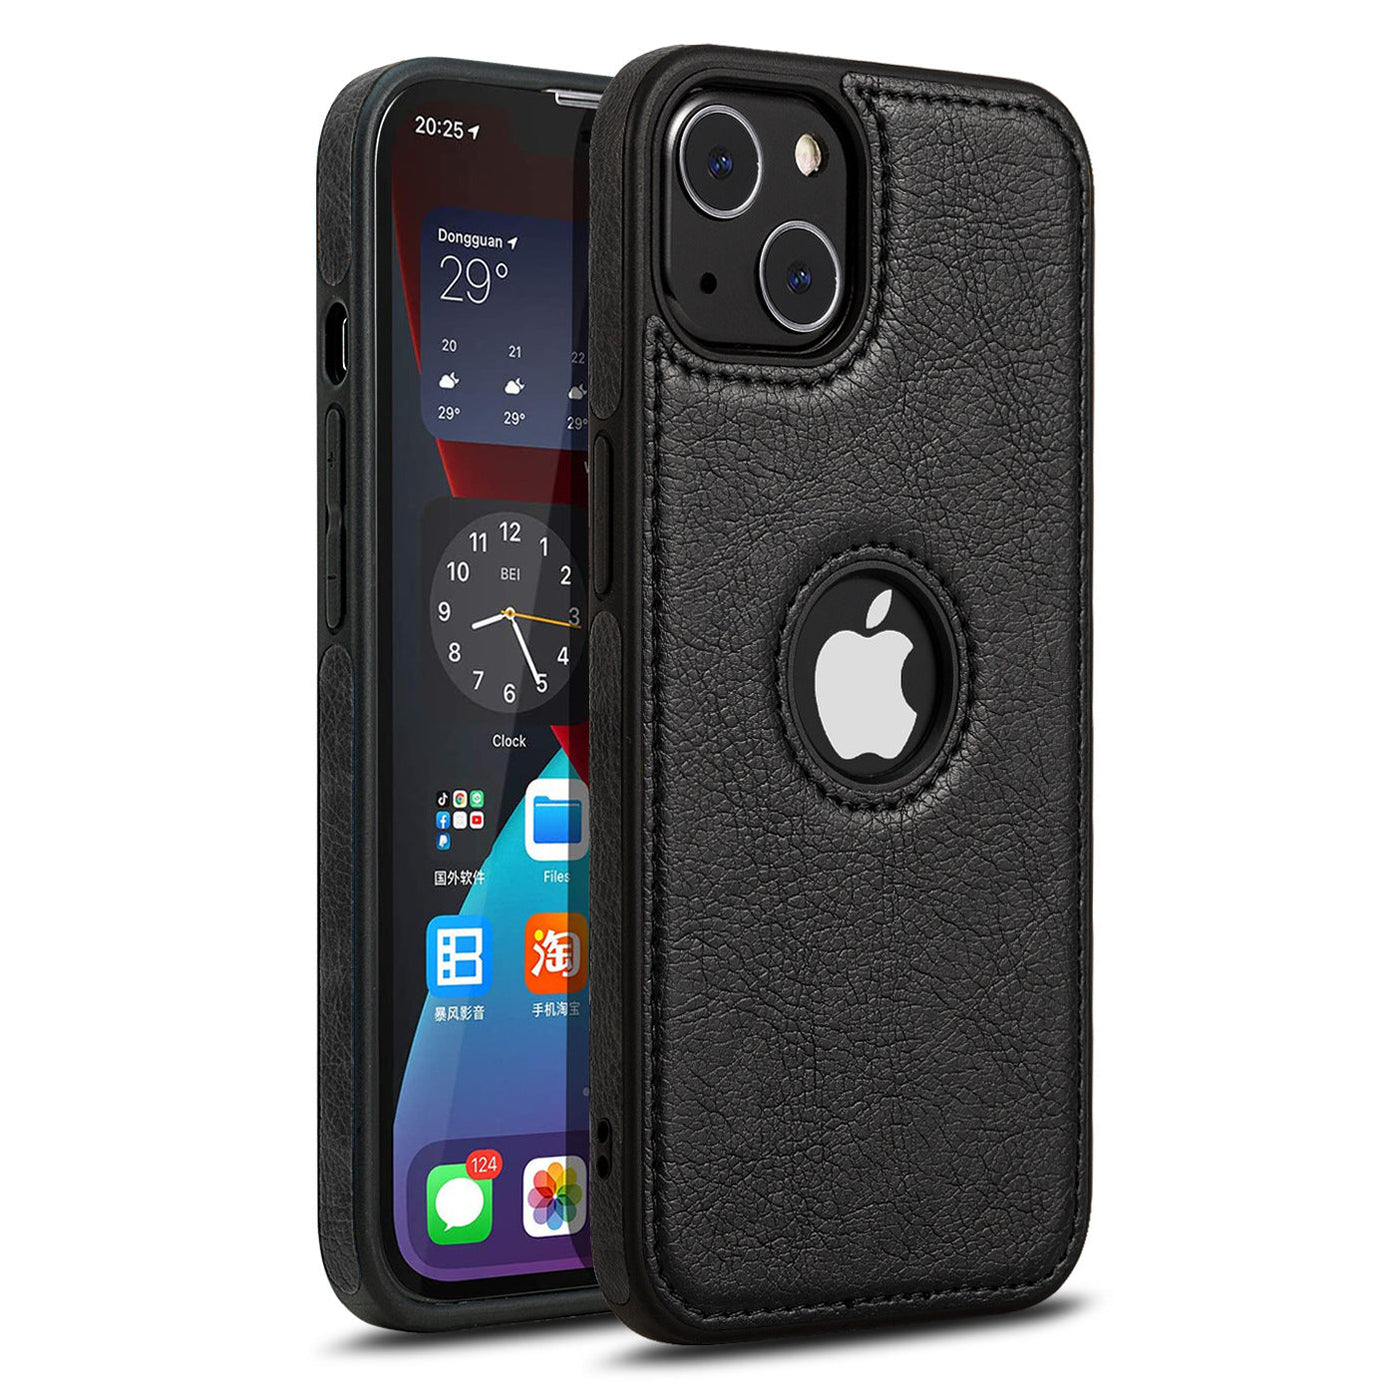 Iphone 13 logo cut leather mobile cover